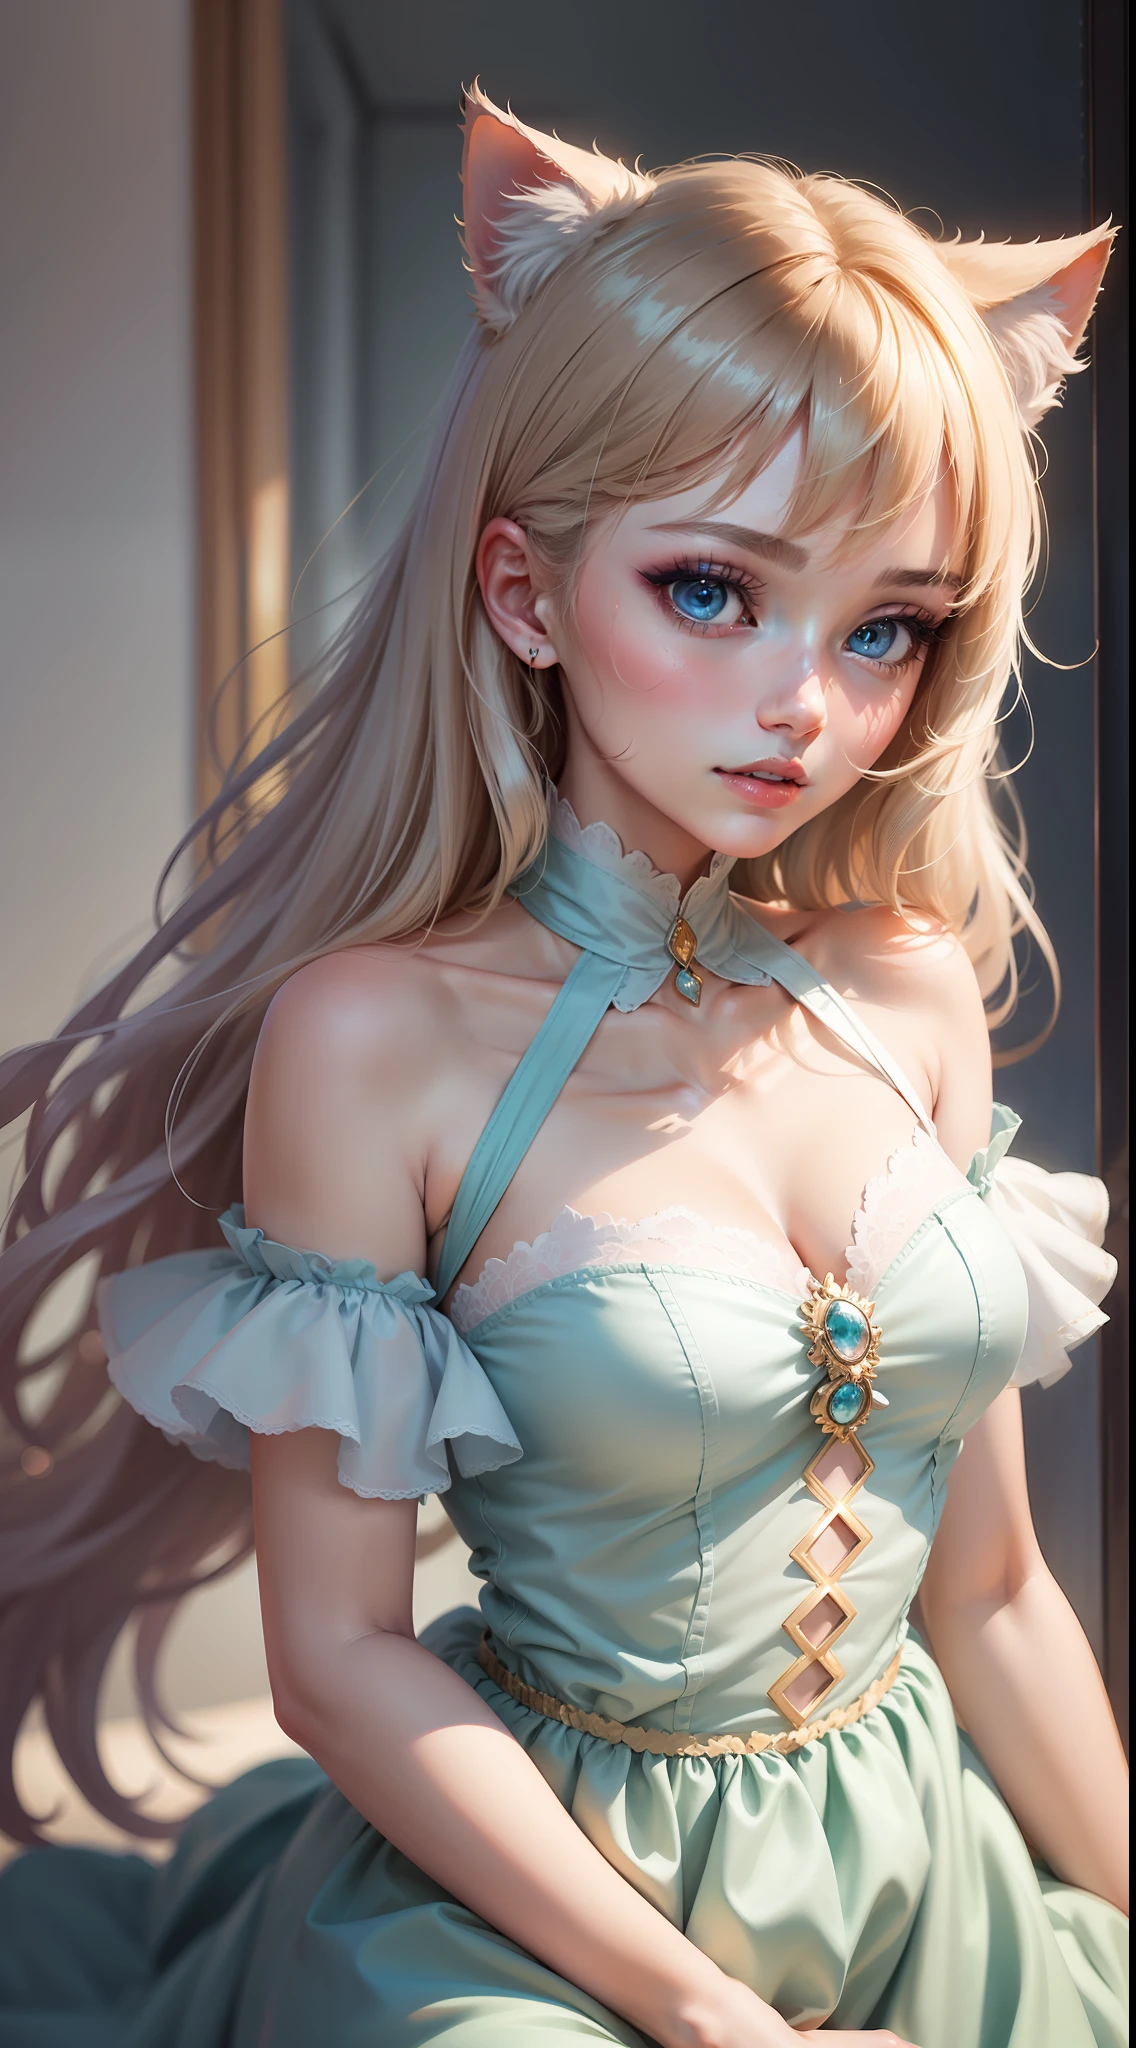 high high quality，tmasterpiece，Delicate facial features，Delicate hair，Delicate eyes，Kizi，Almond-shaped light blue eyes，light-blonde hair，Light pink dress，skirt with frills，cat ear，magia，tmasterpiece，（best qualityer)，（super-fine），（illustratio），（detailedlight），(style of anime)，(Color shattered)，(Clear  eyes）（ellegance）（shine），（aquarelle），（Delicate and colorful makeup），（Ray traching）(The facial features are delicate)，（graceful and dignified），（strong colors），（rich details​）（The proportions are correct）